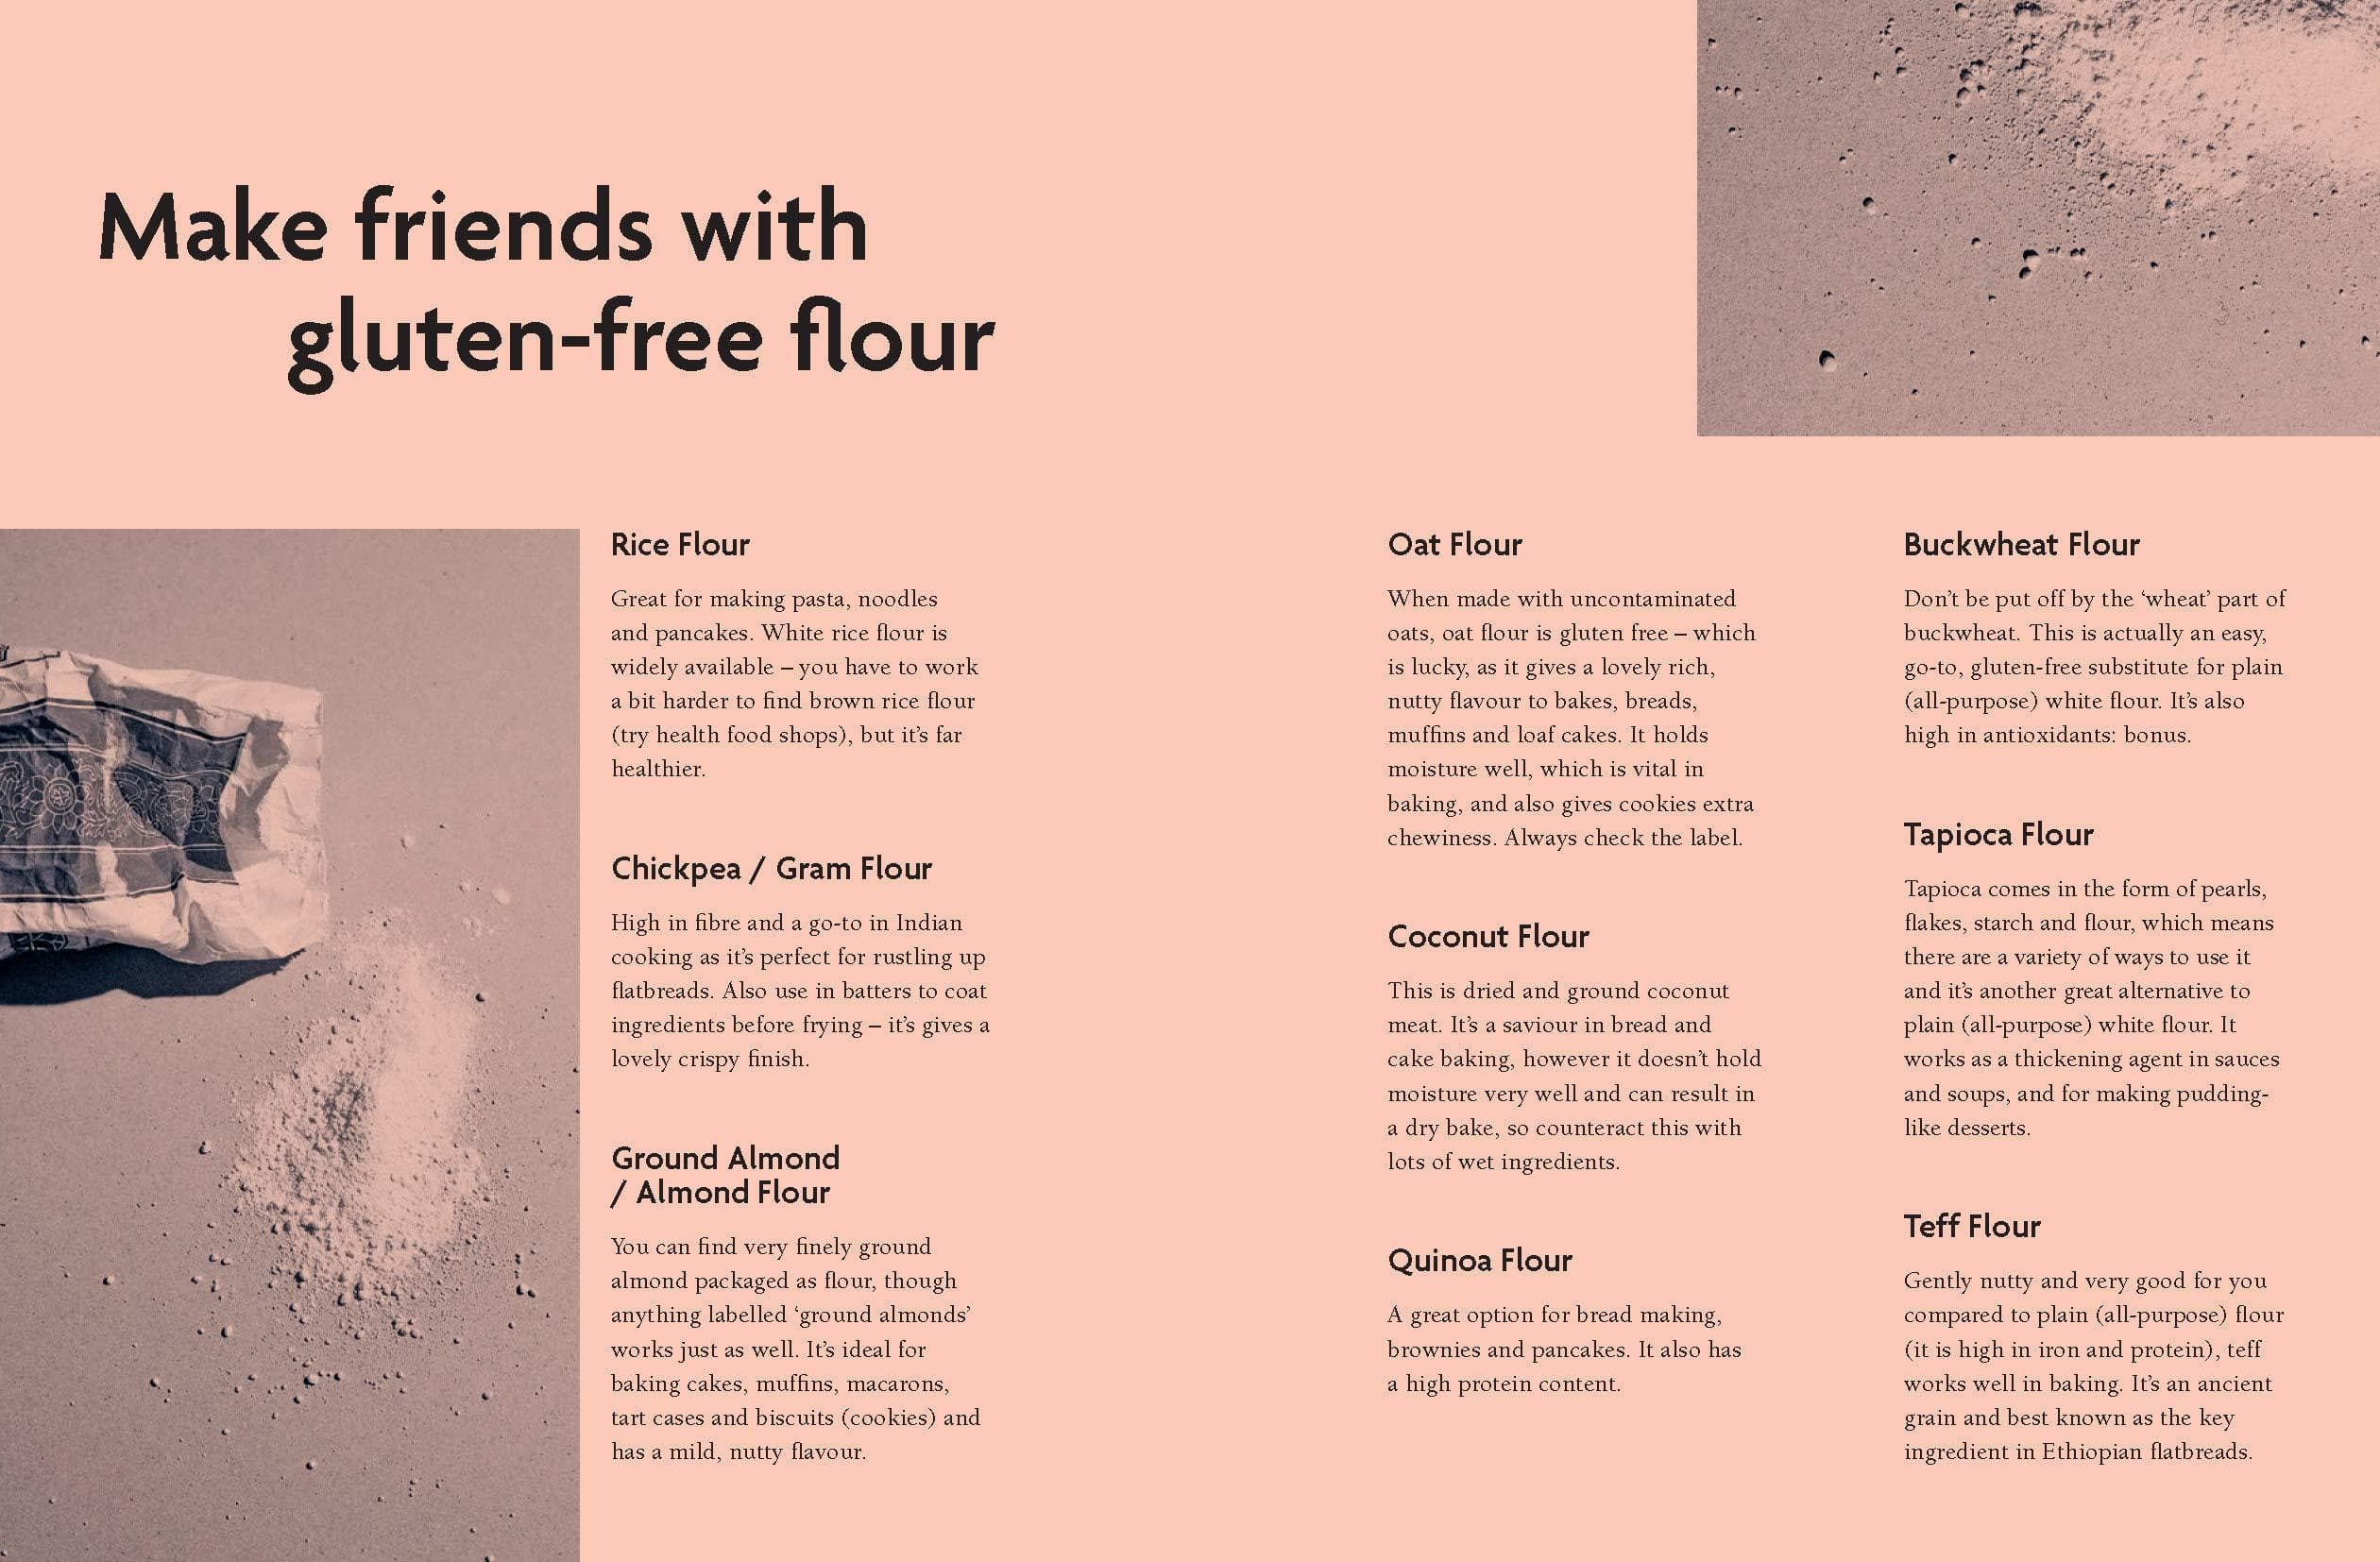 How to be Gluten-Free and Keep Your Friends - SoulBia